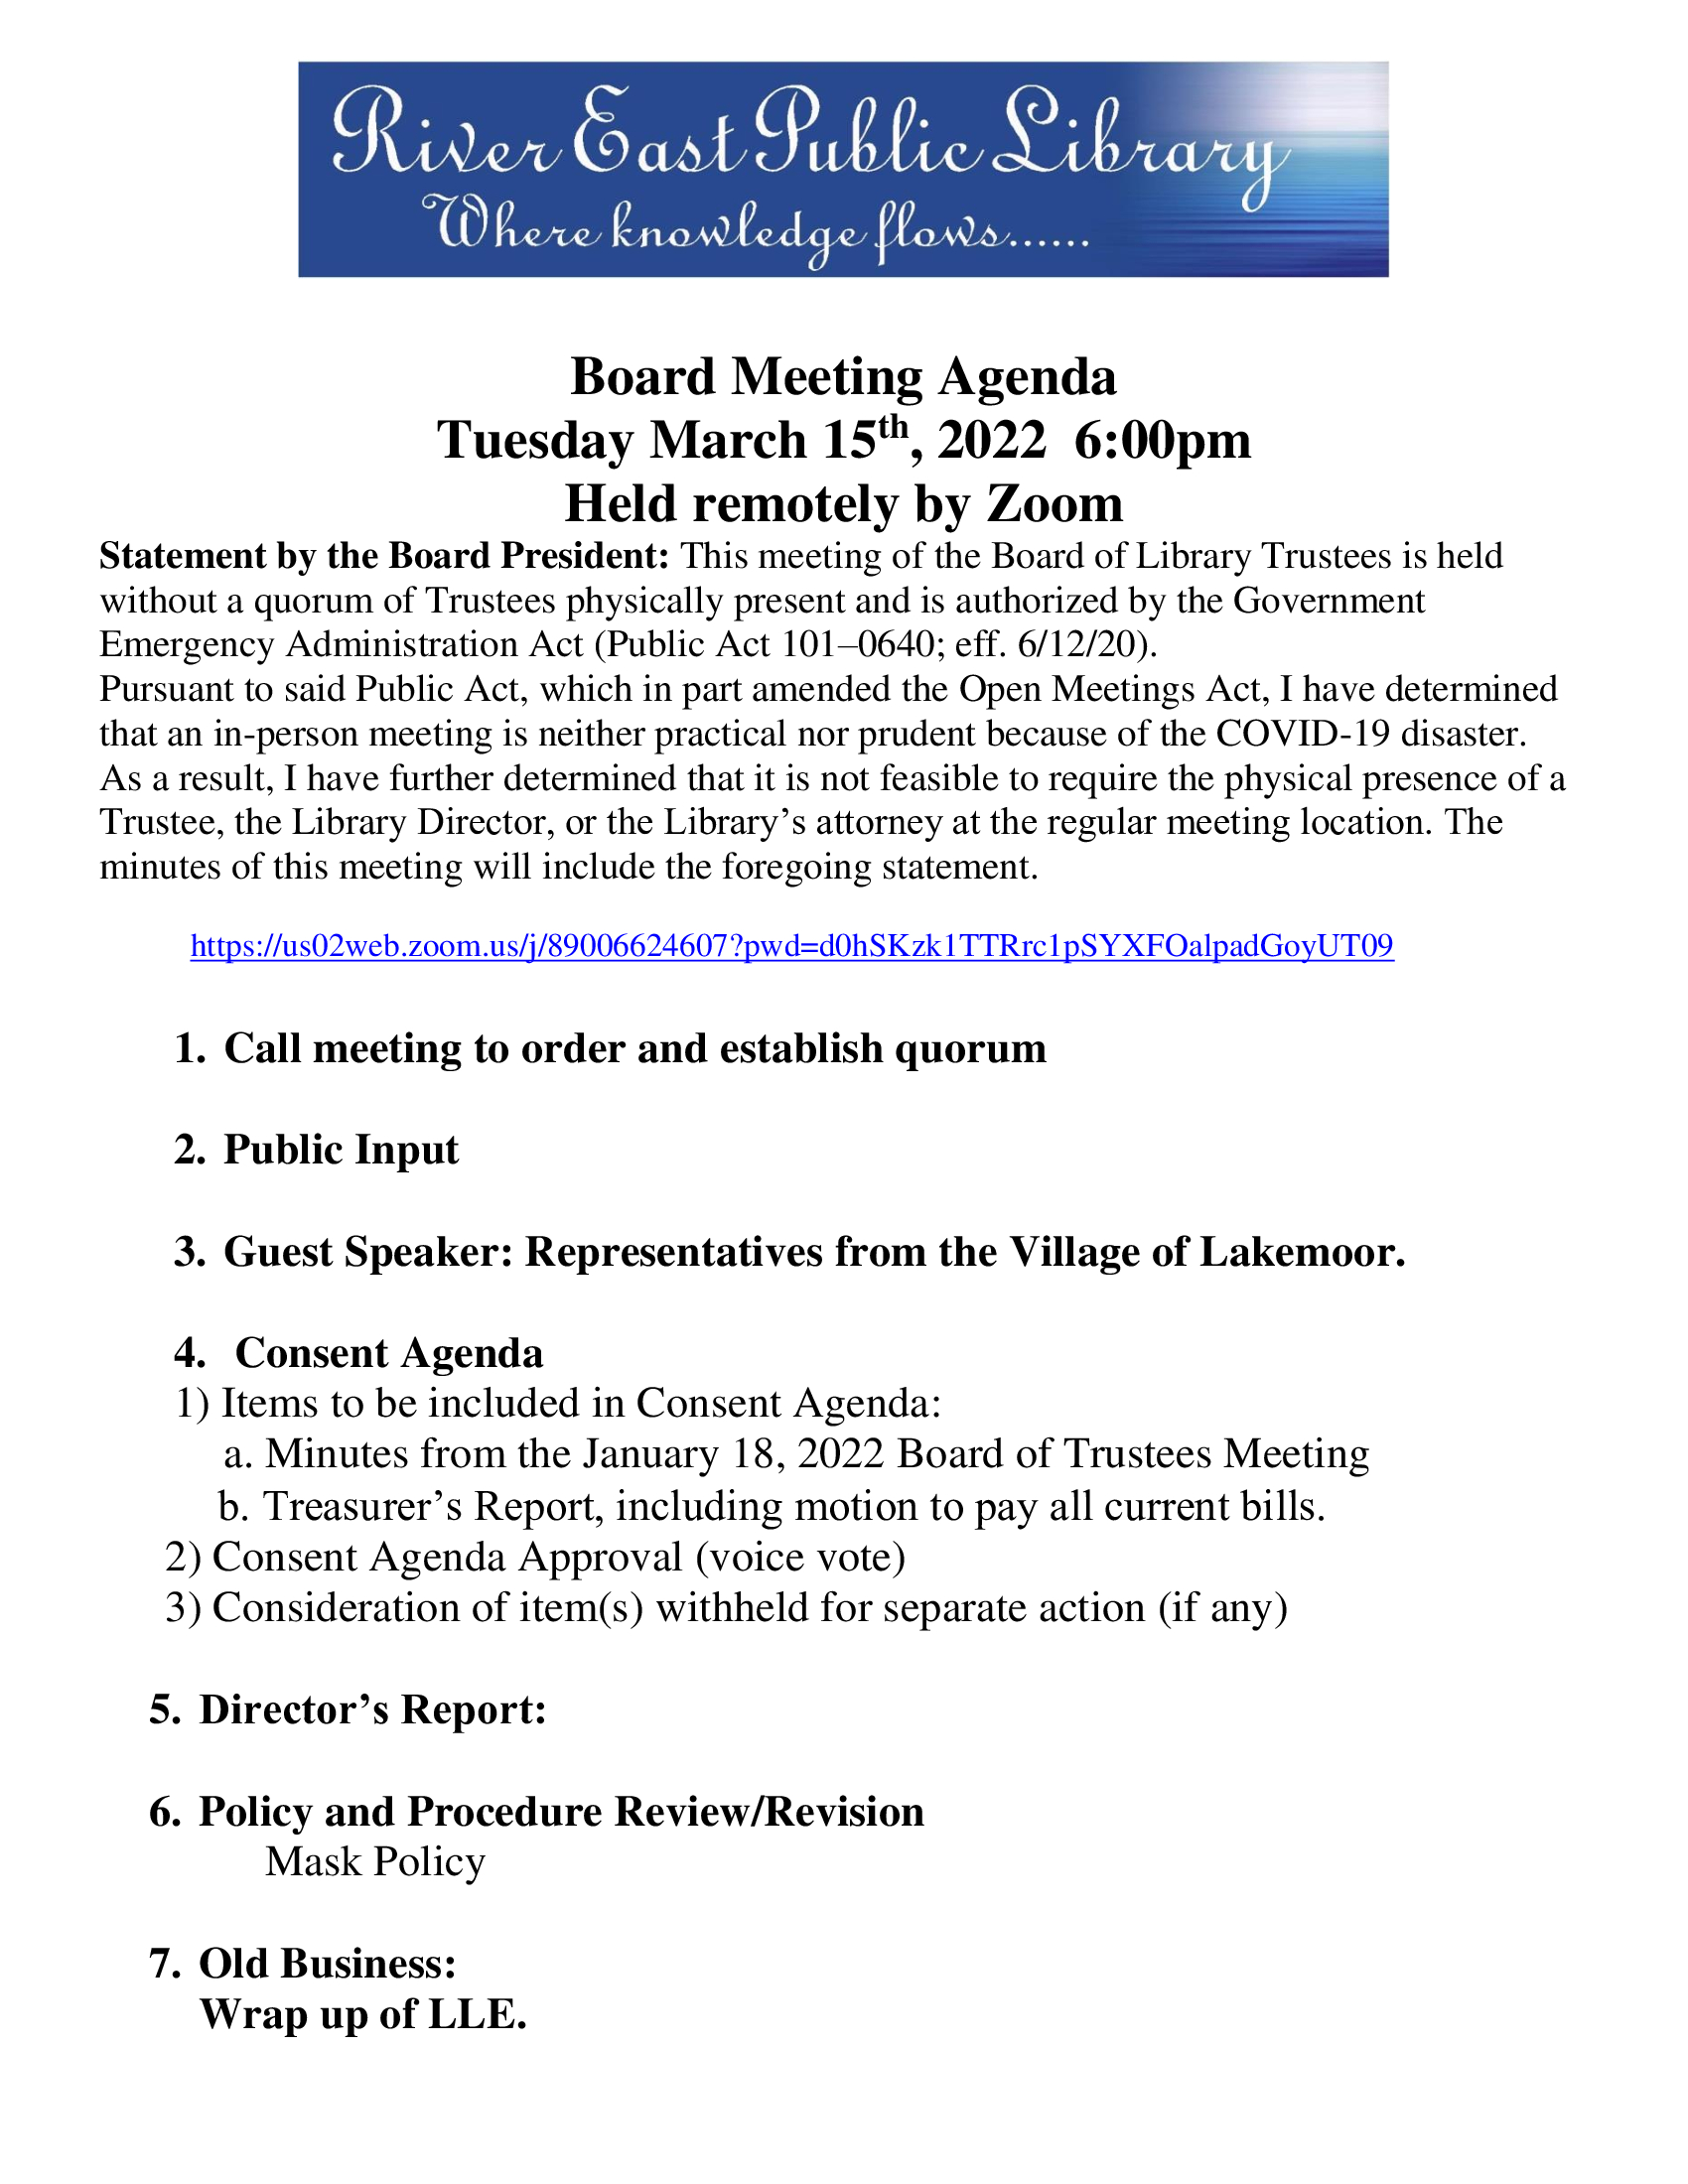 Agenda and Minutes of the most recent River East Public Library Board Meeting